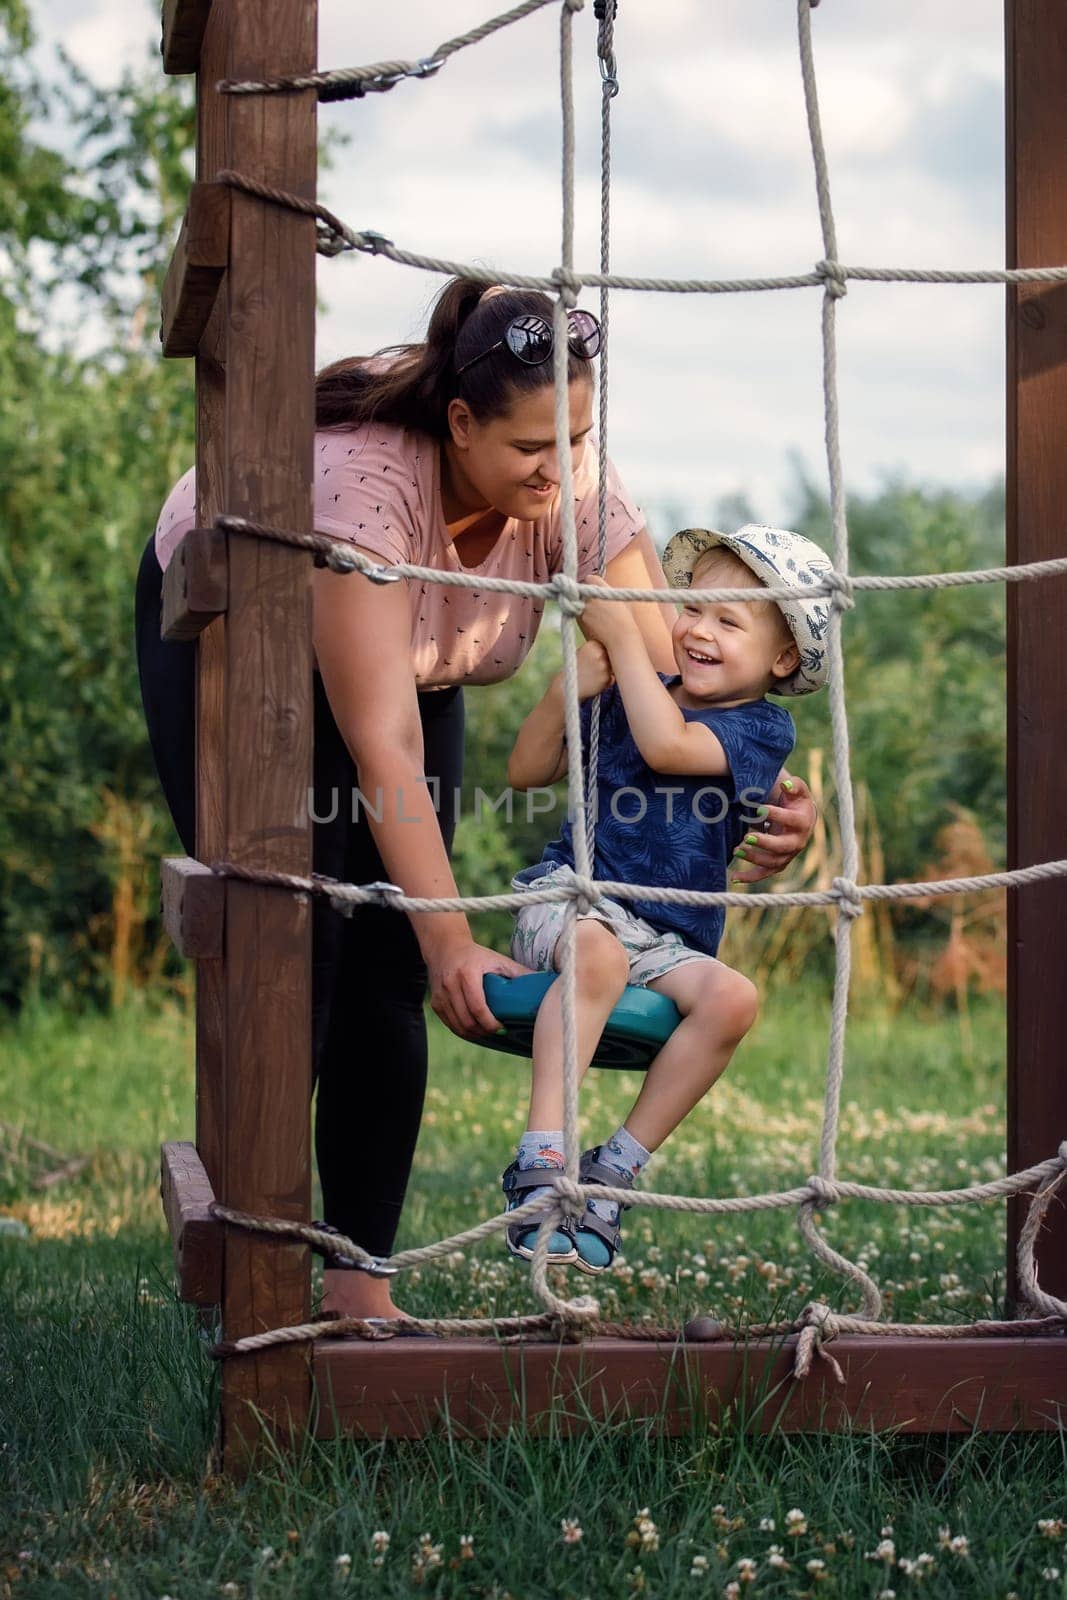 Mom has fun playing with her son on the ropes ladder in the garden playground by Lincikas